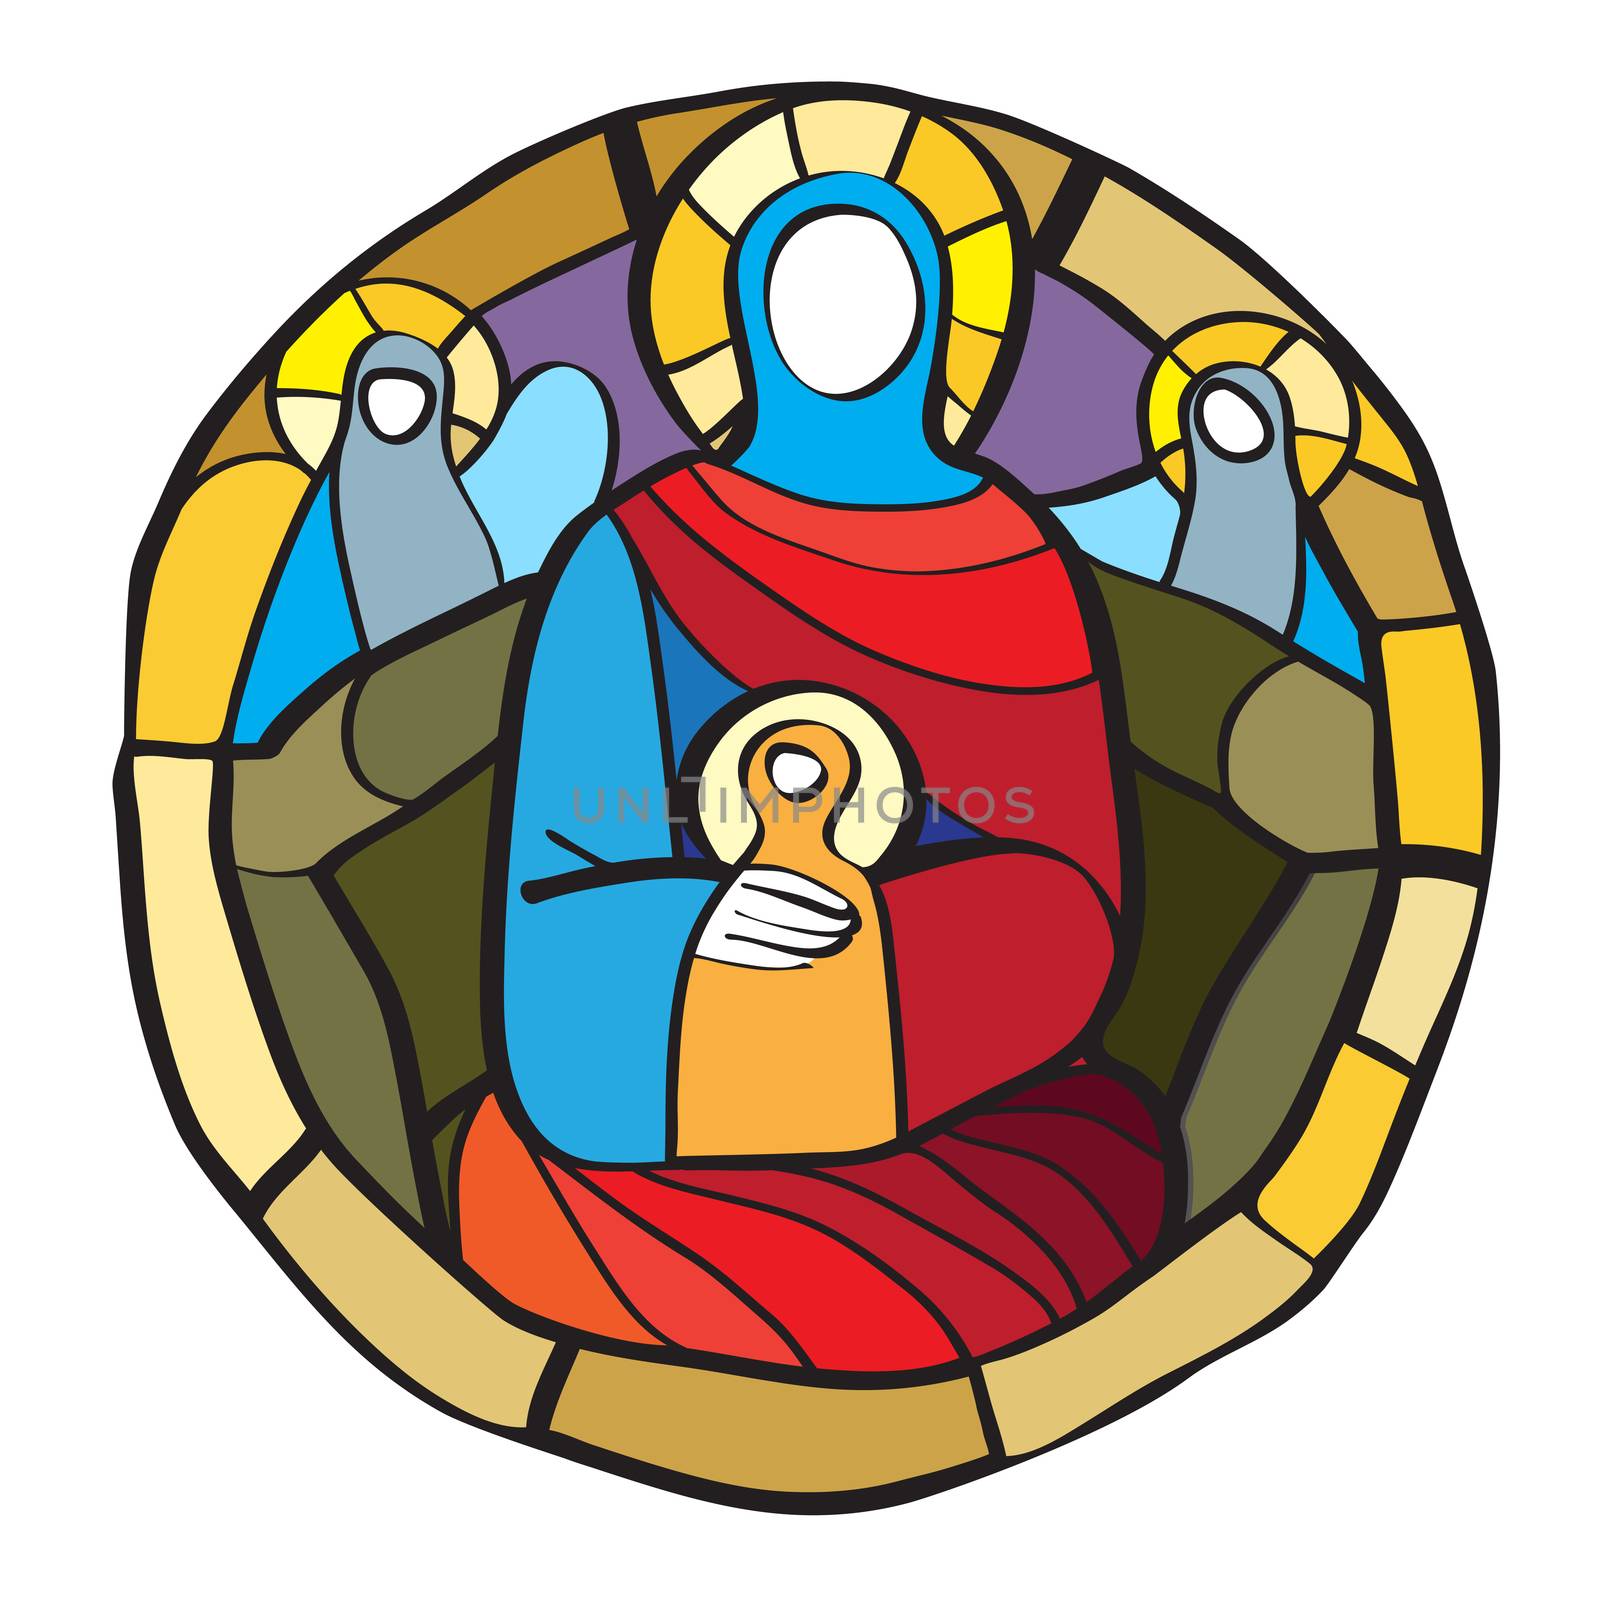 Stained glass primitive style illustration of the Virgin with child, blank faces colored project isolated on white